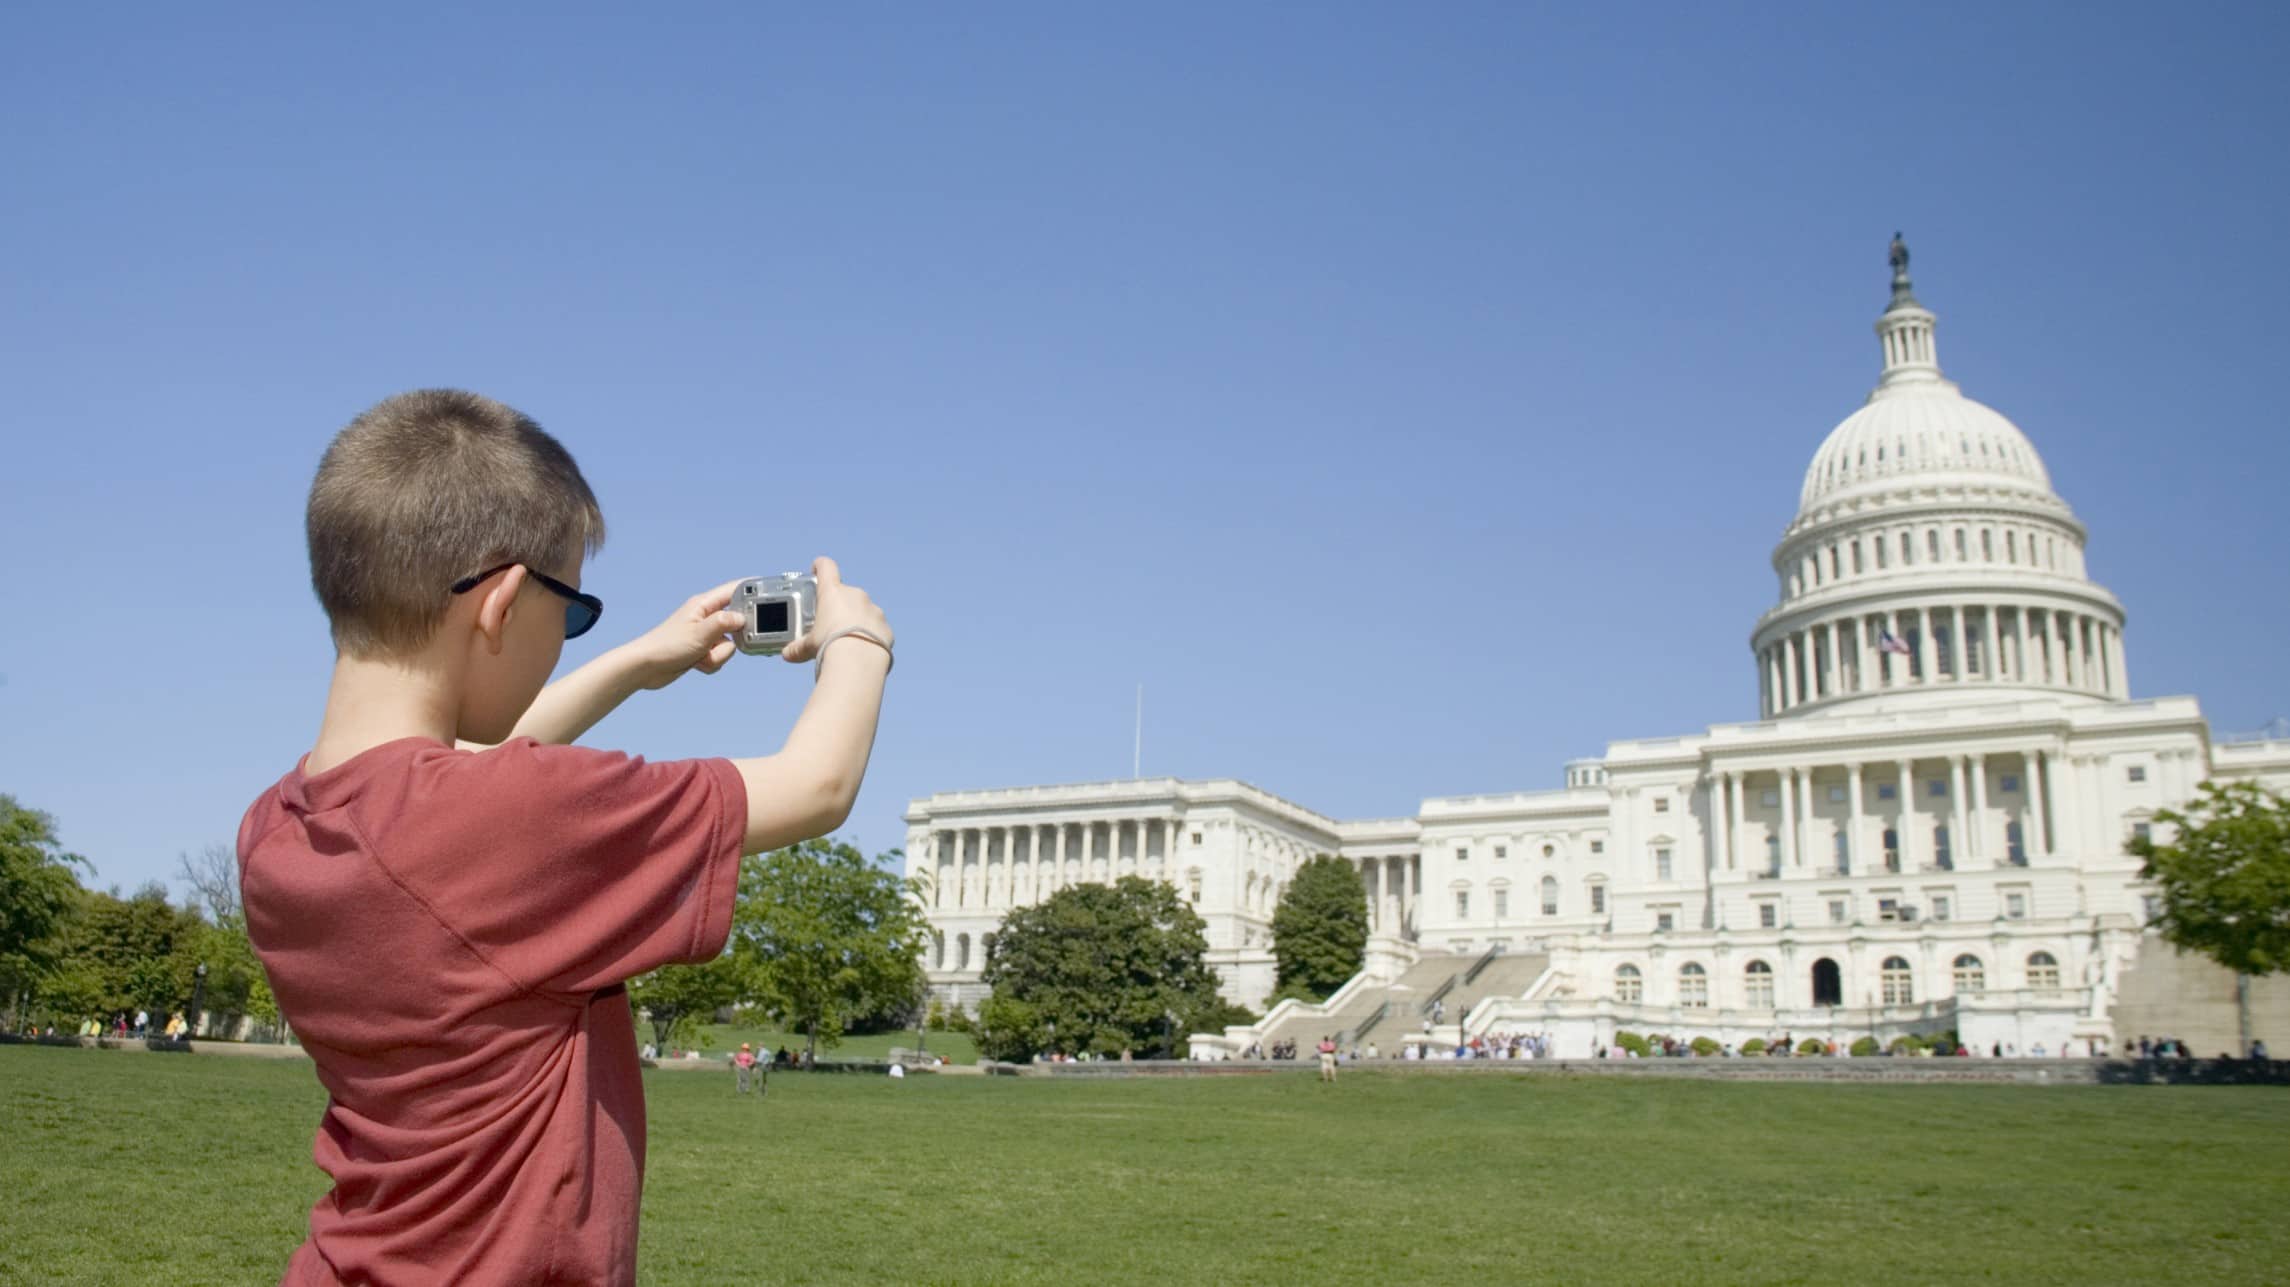 Kid photographing the capital building in Washington DC